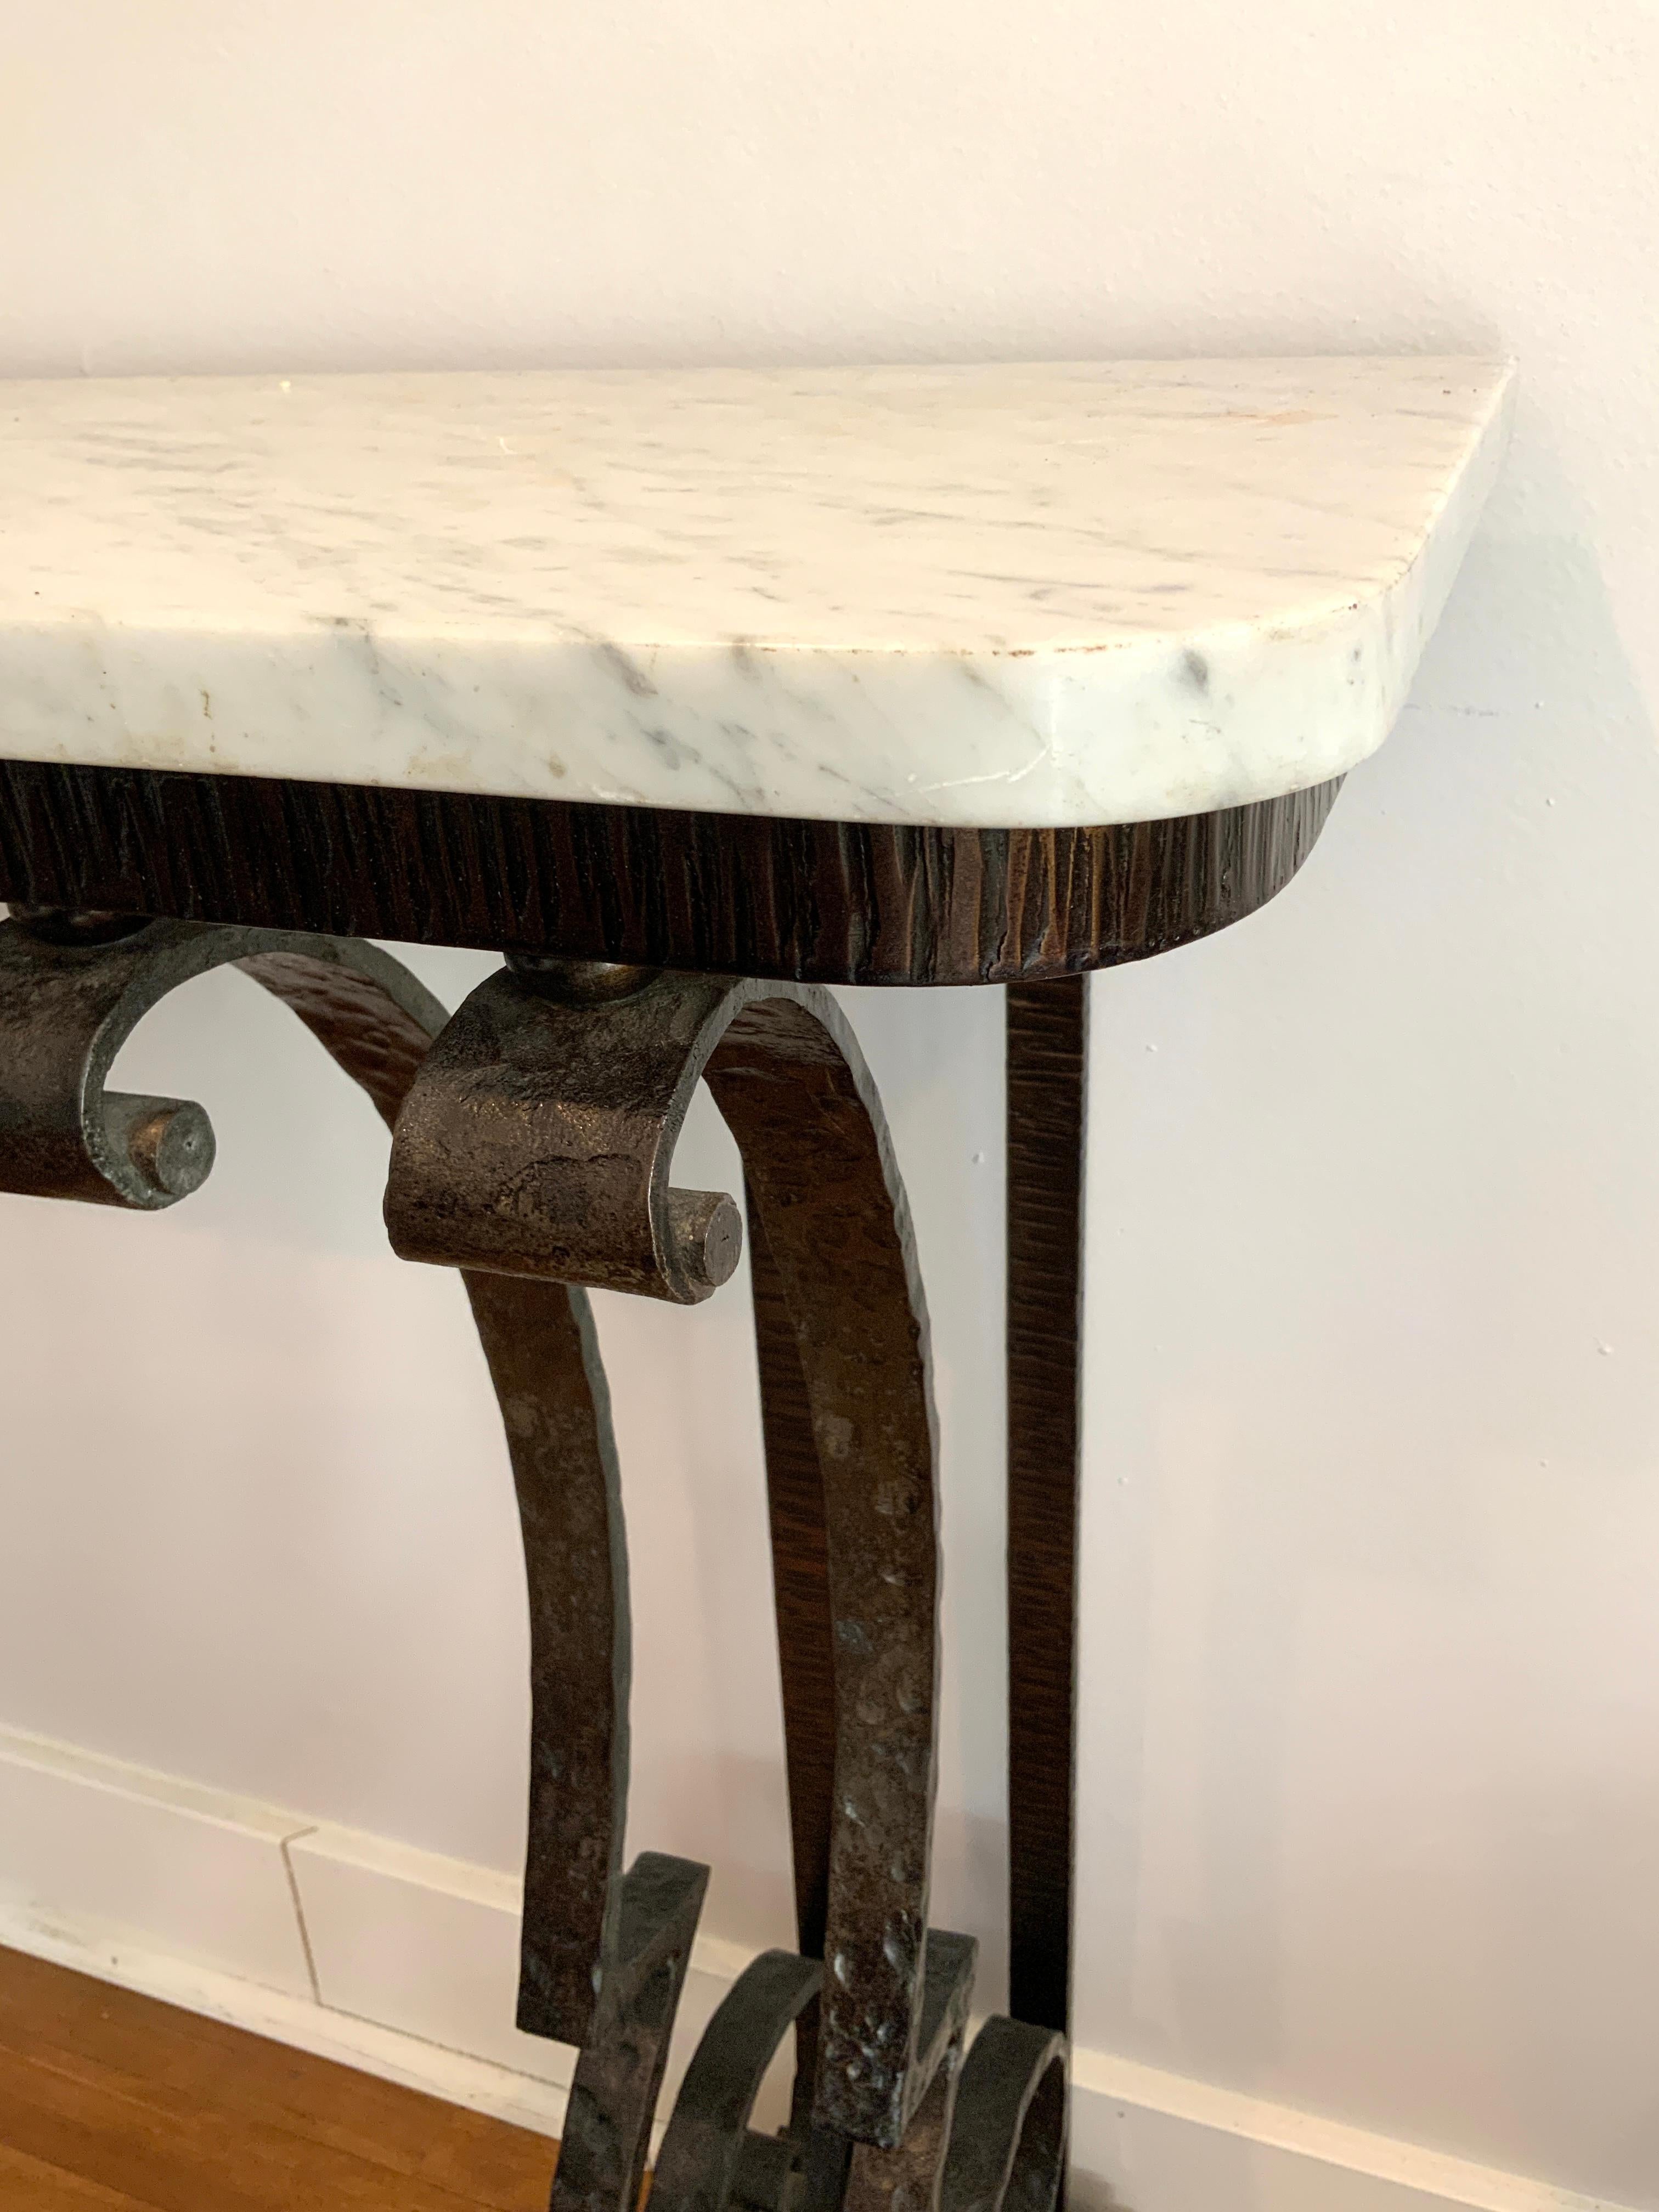 Art Deco Raymond Subes Attributed Wrought-Iron Hand-Hammered Console Table, ca. 1930’s For Sale